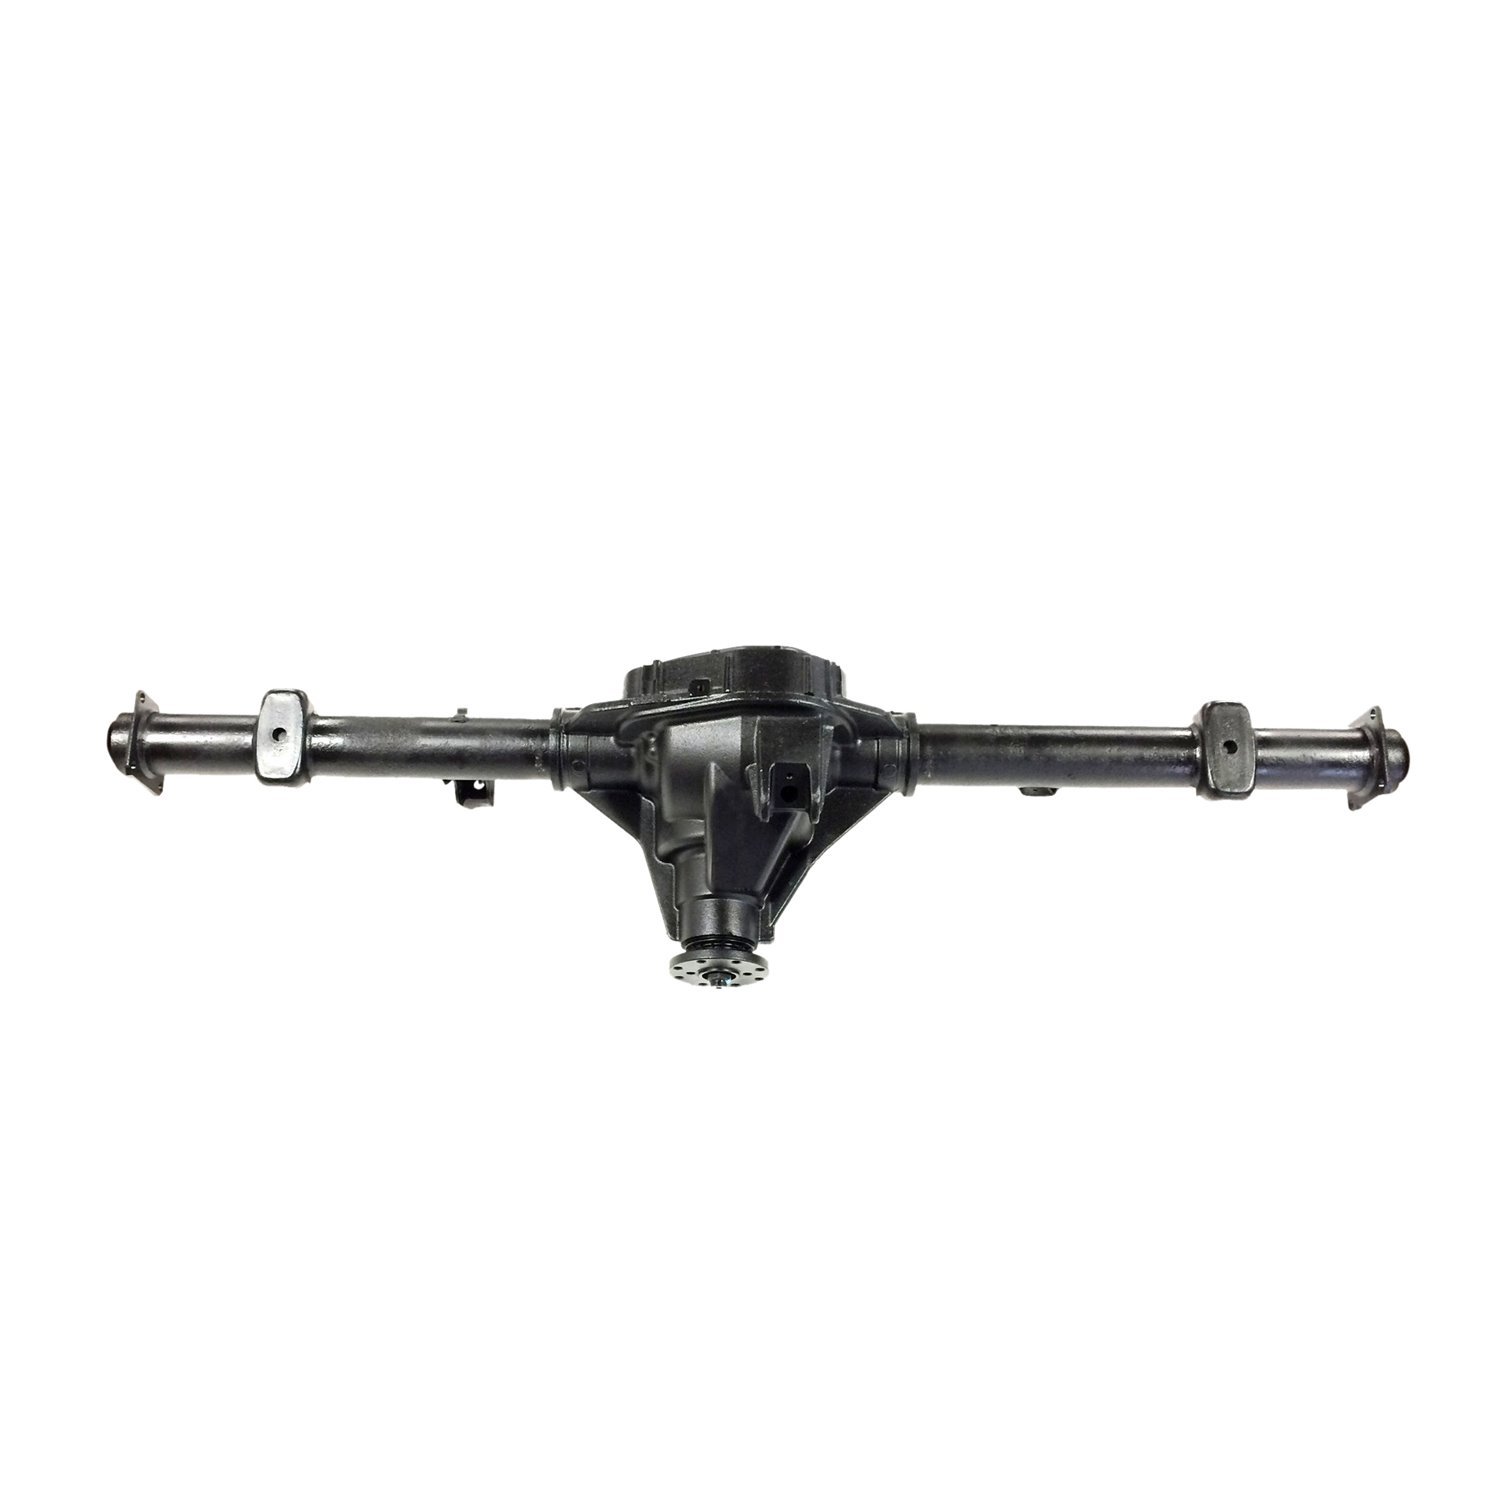 Remanufactured Complete Axle Assembly for Ford 9.75" 12-14 Ford F150 3.73 Ratio, 7 Lug